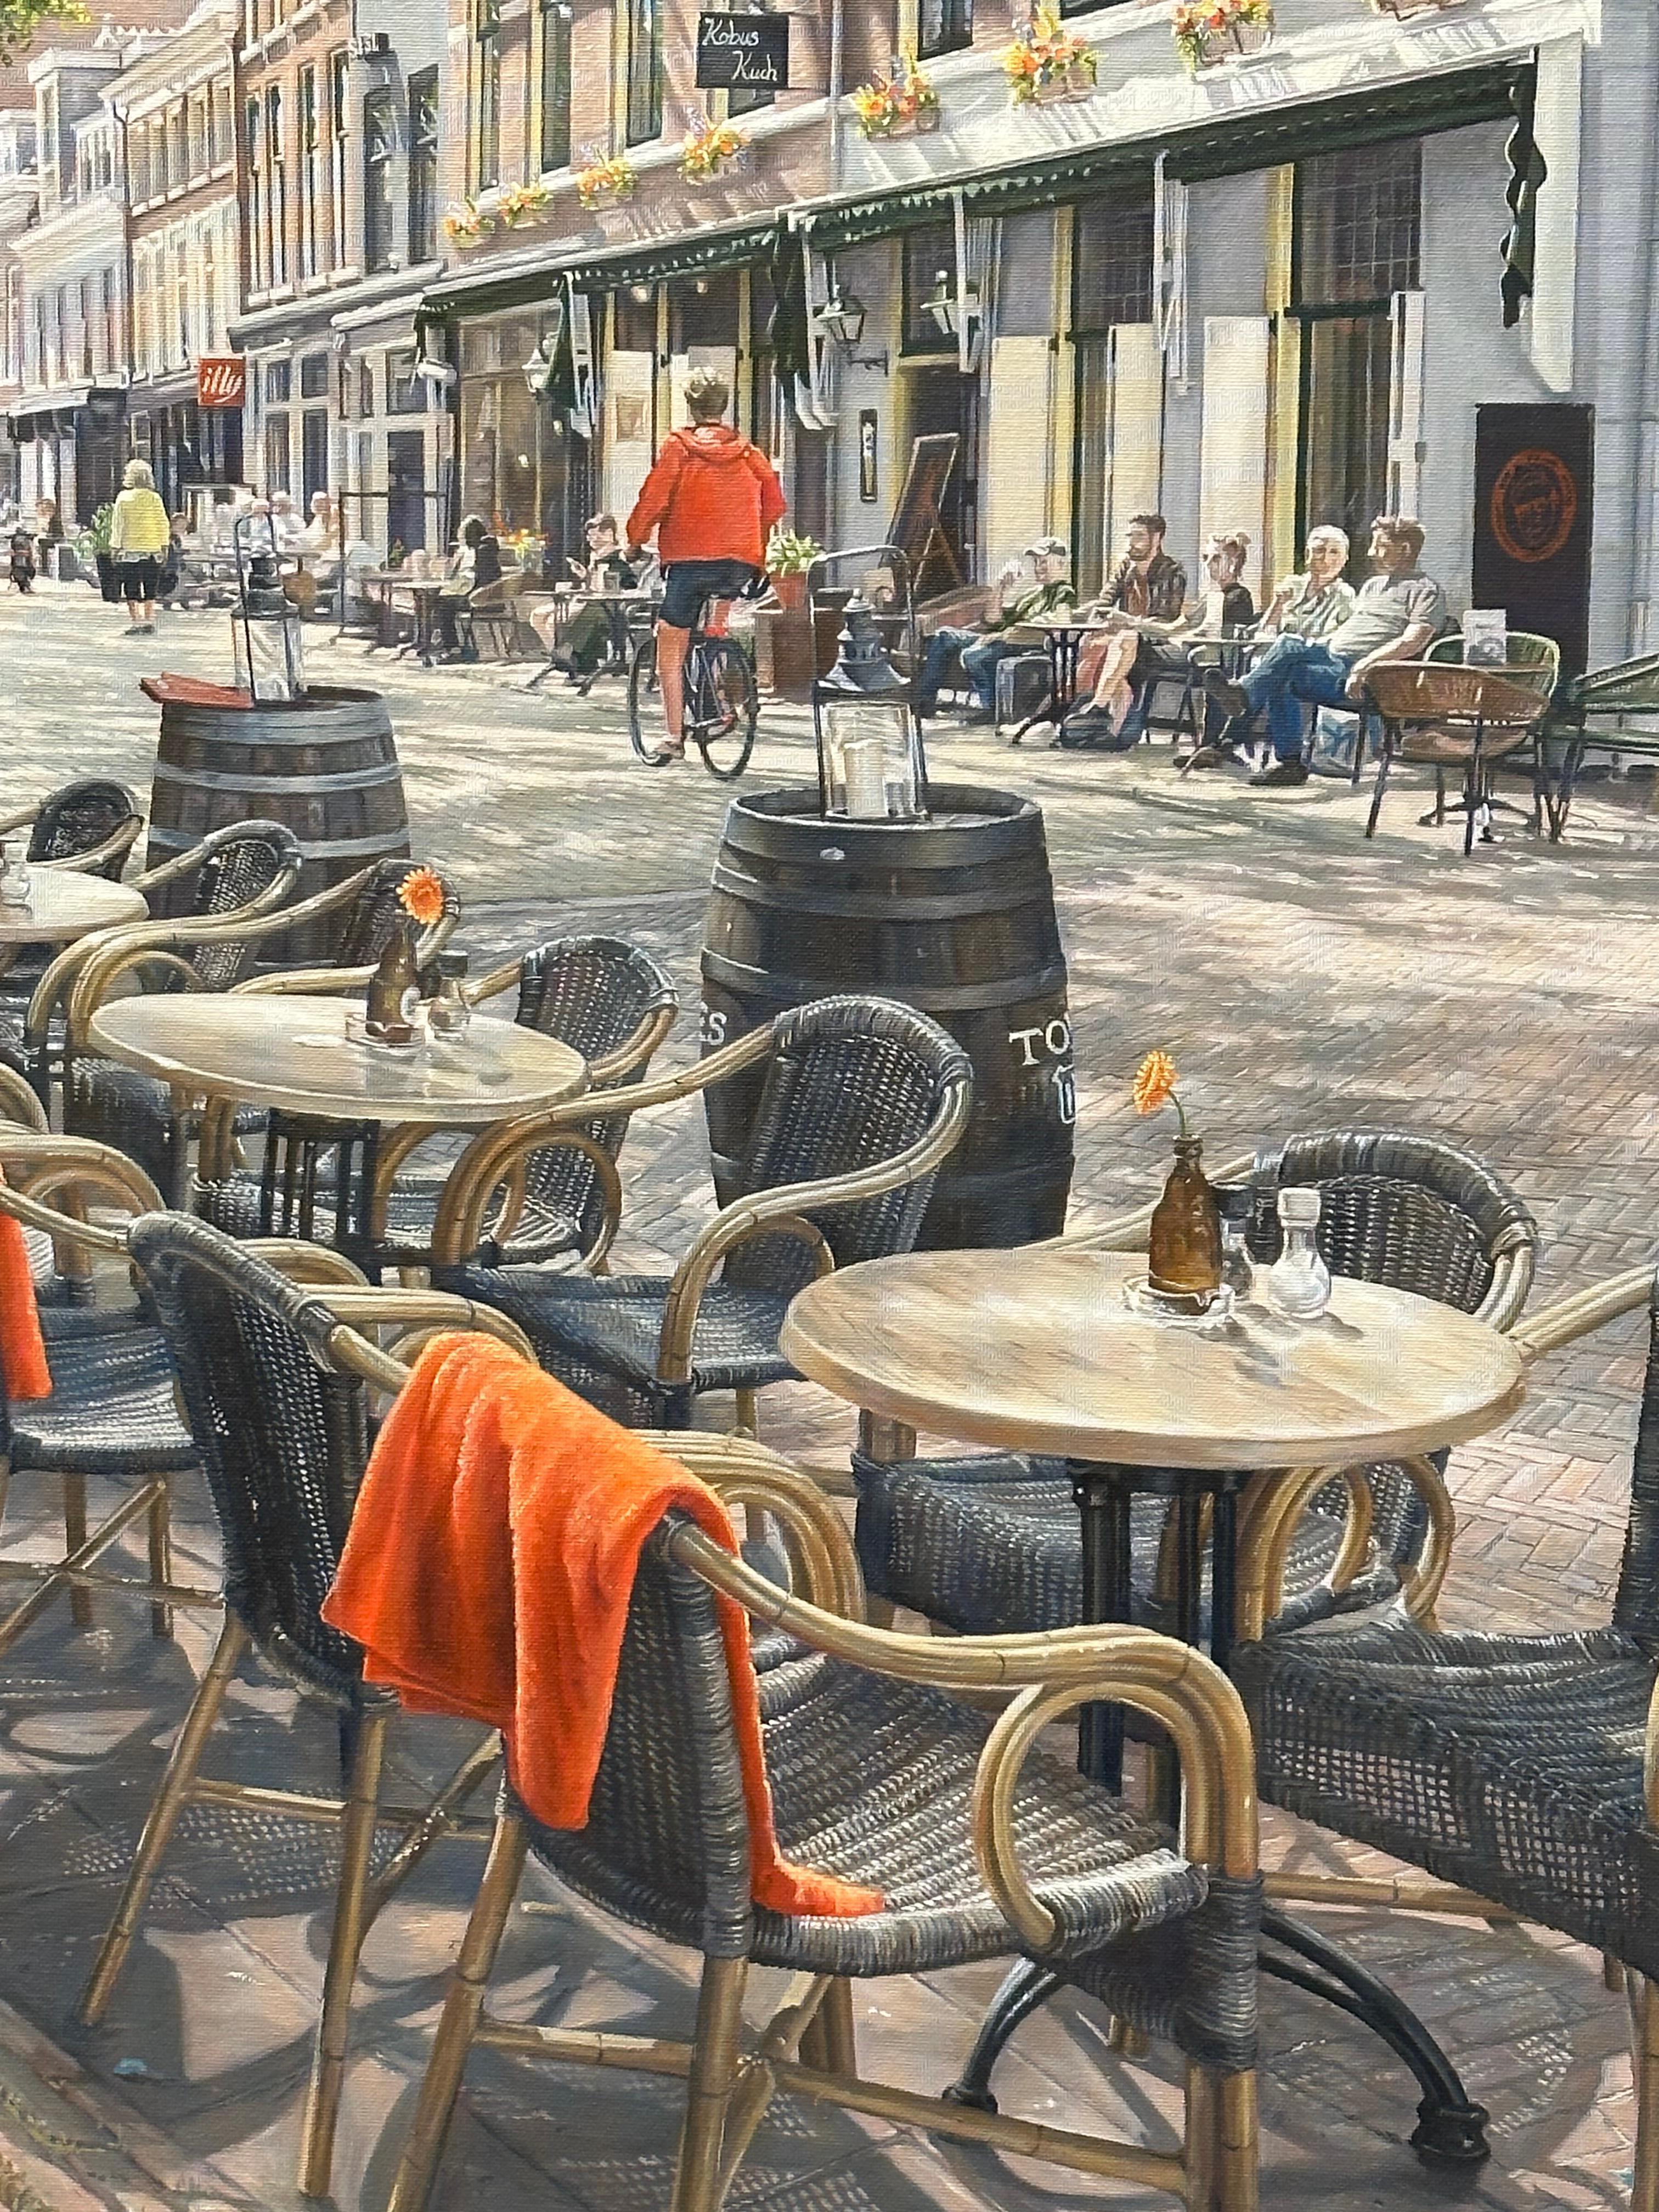 Kobus Kuch, Delft - 21st Century Hyper Realistic oil painting of a Dutch City 1